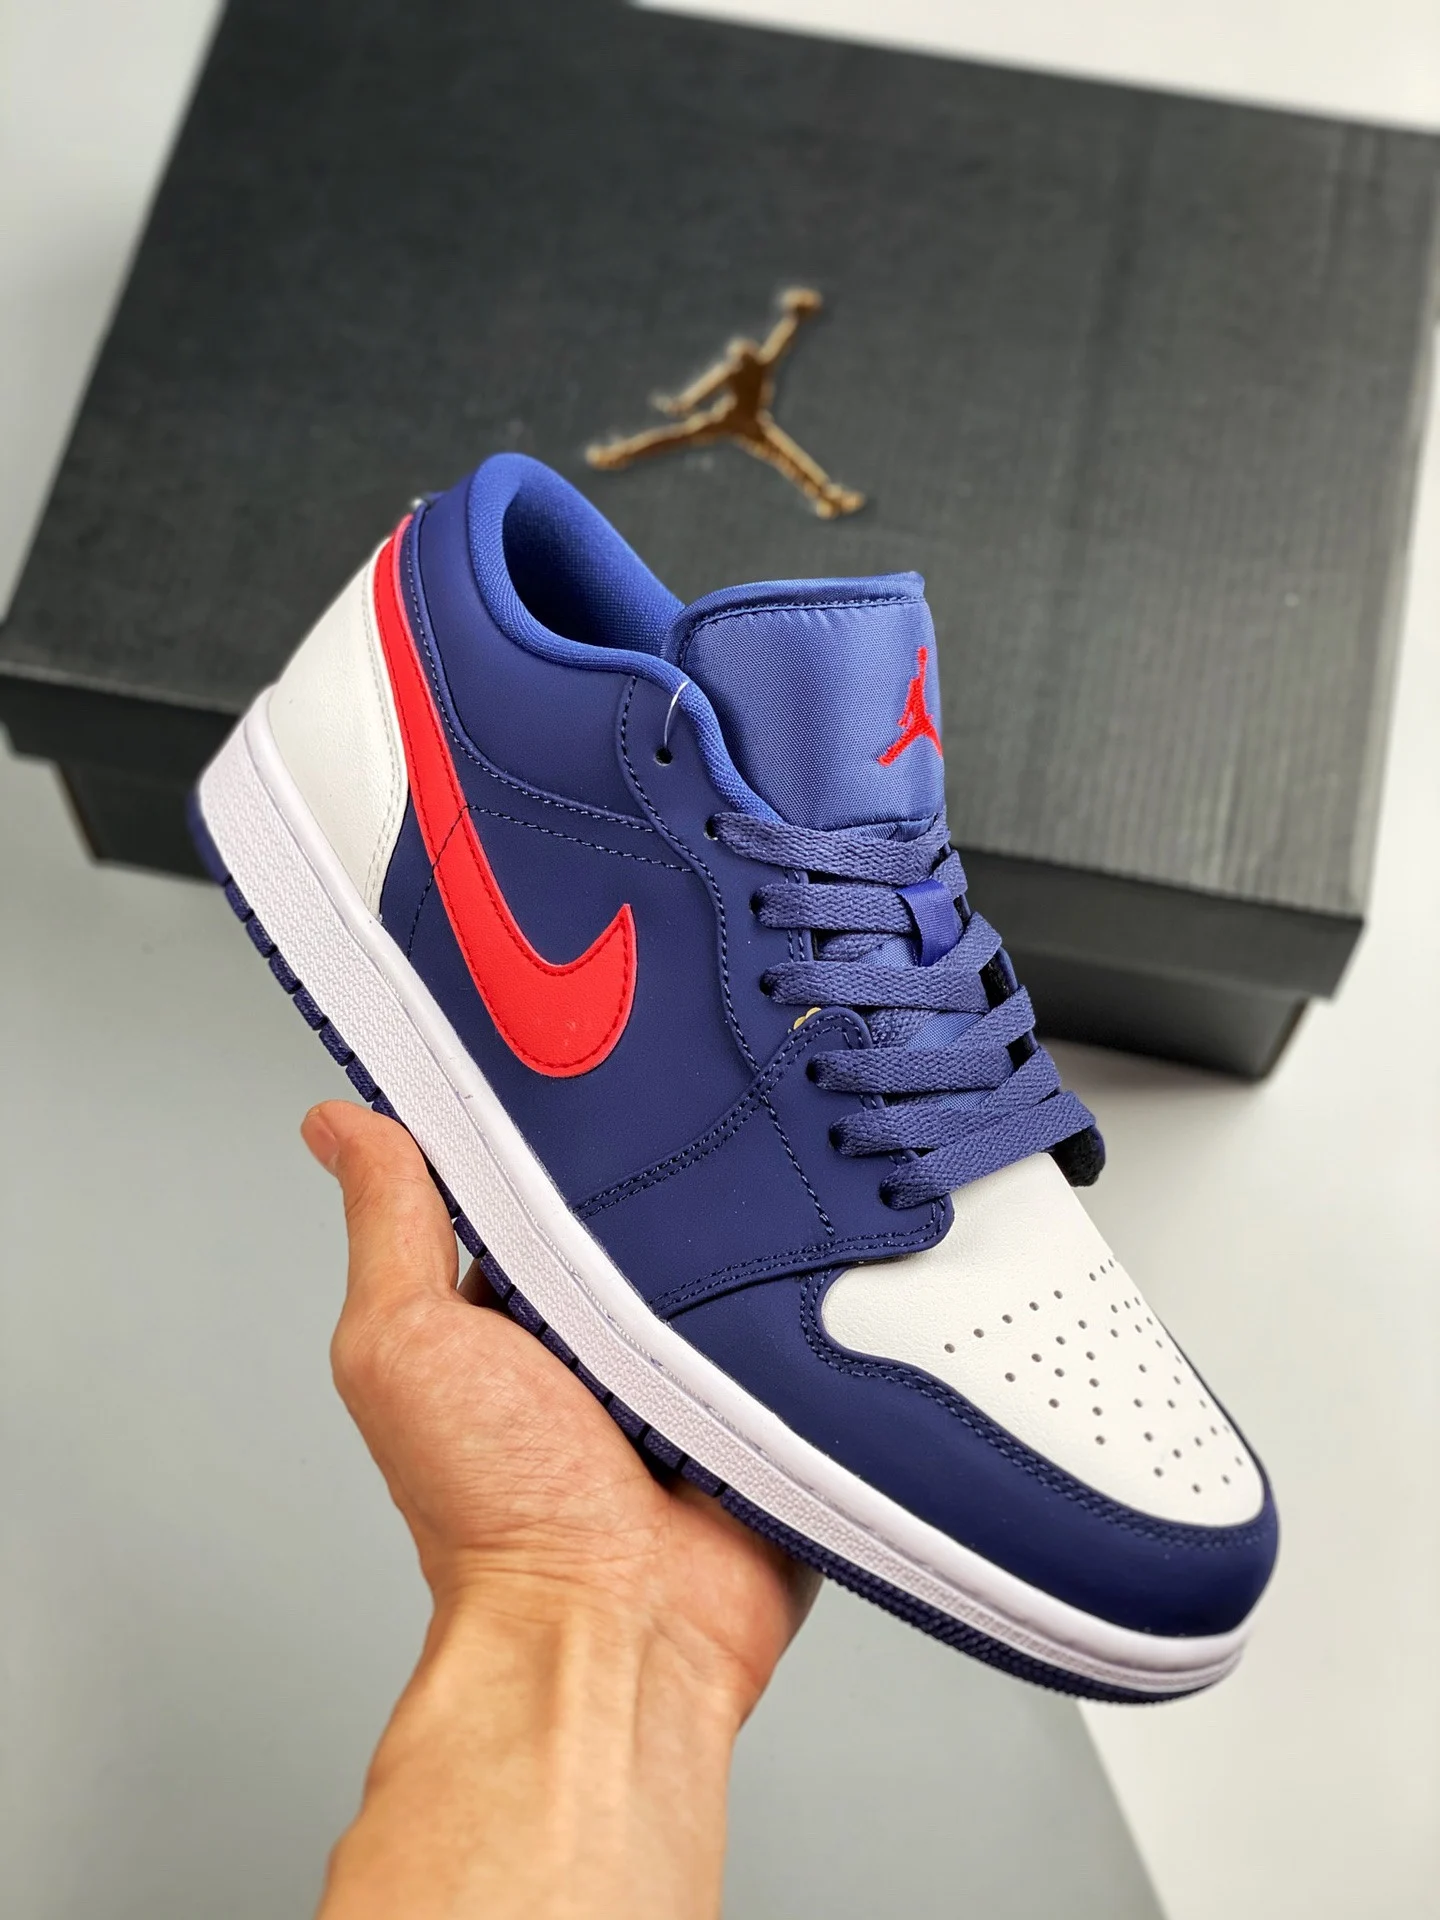 Air Jordan 1 Low USA Navy Blue White-Red CZ8454-400 For Sale